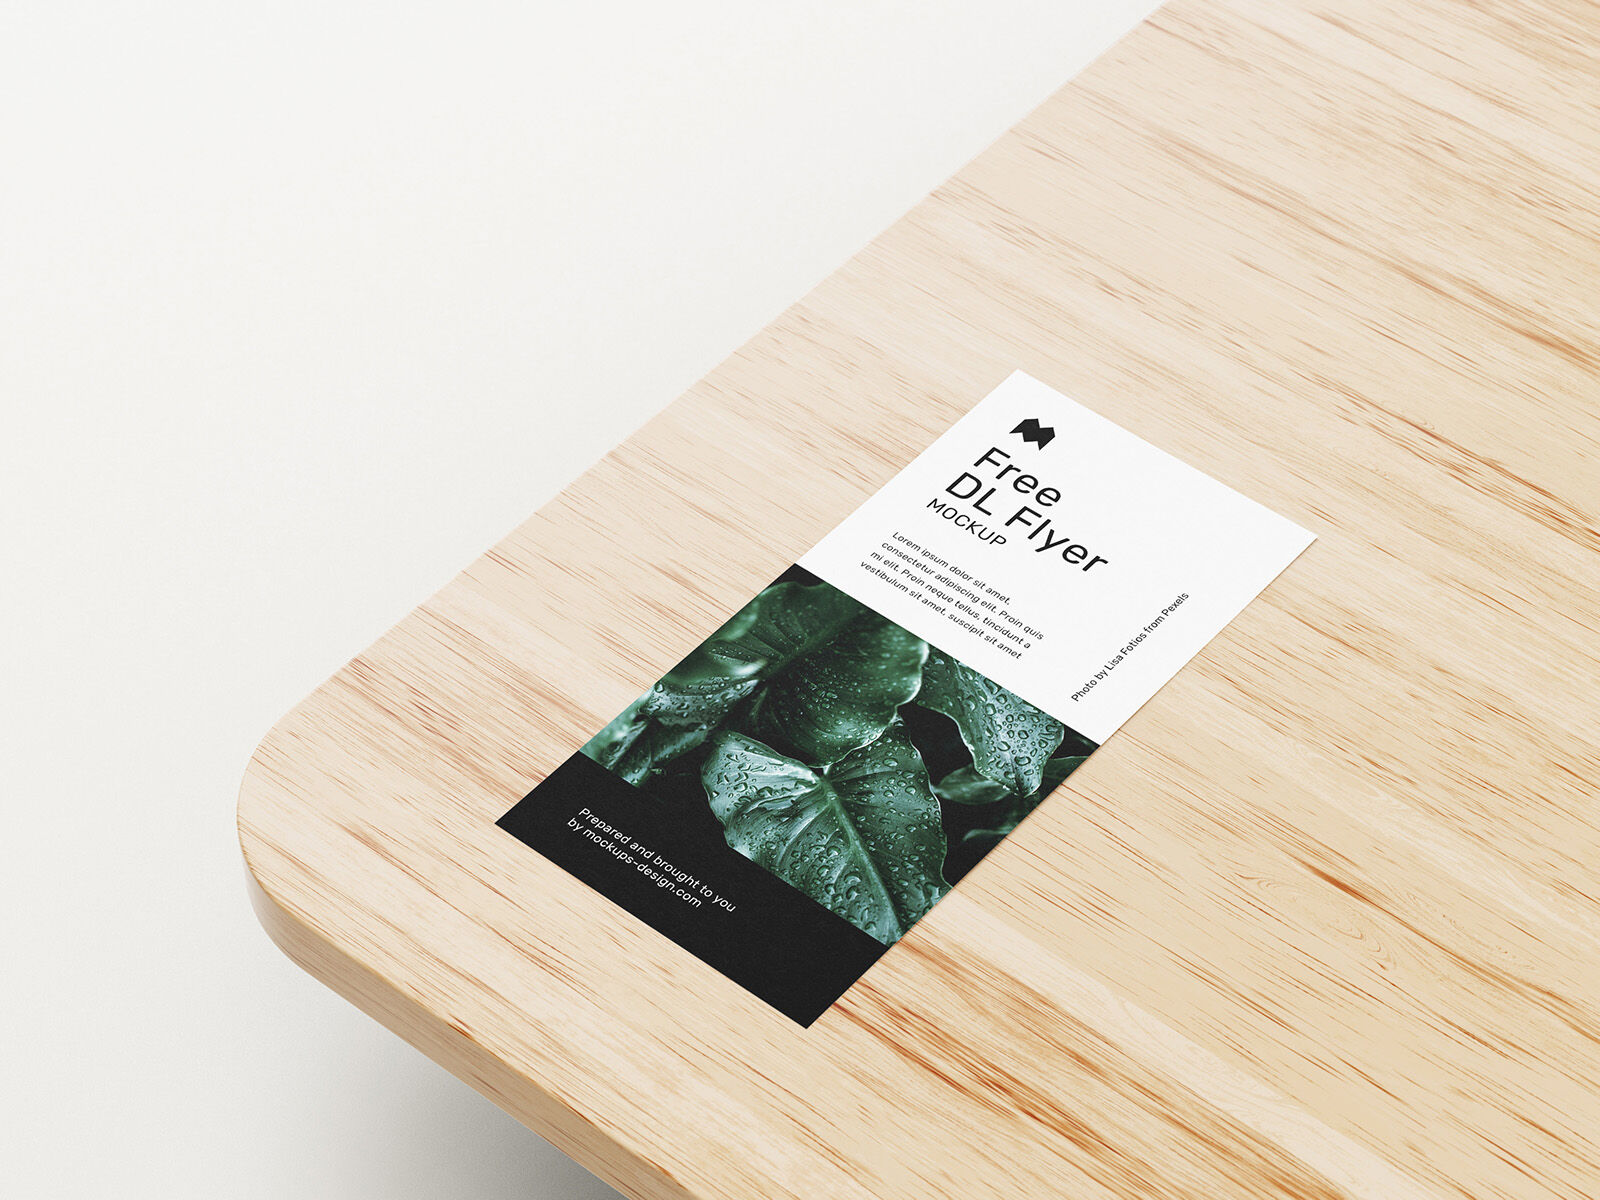 6 Mockups of DL Rack Cards on Wooden Table in Different Views and Positions FREE PSD